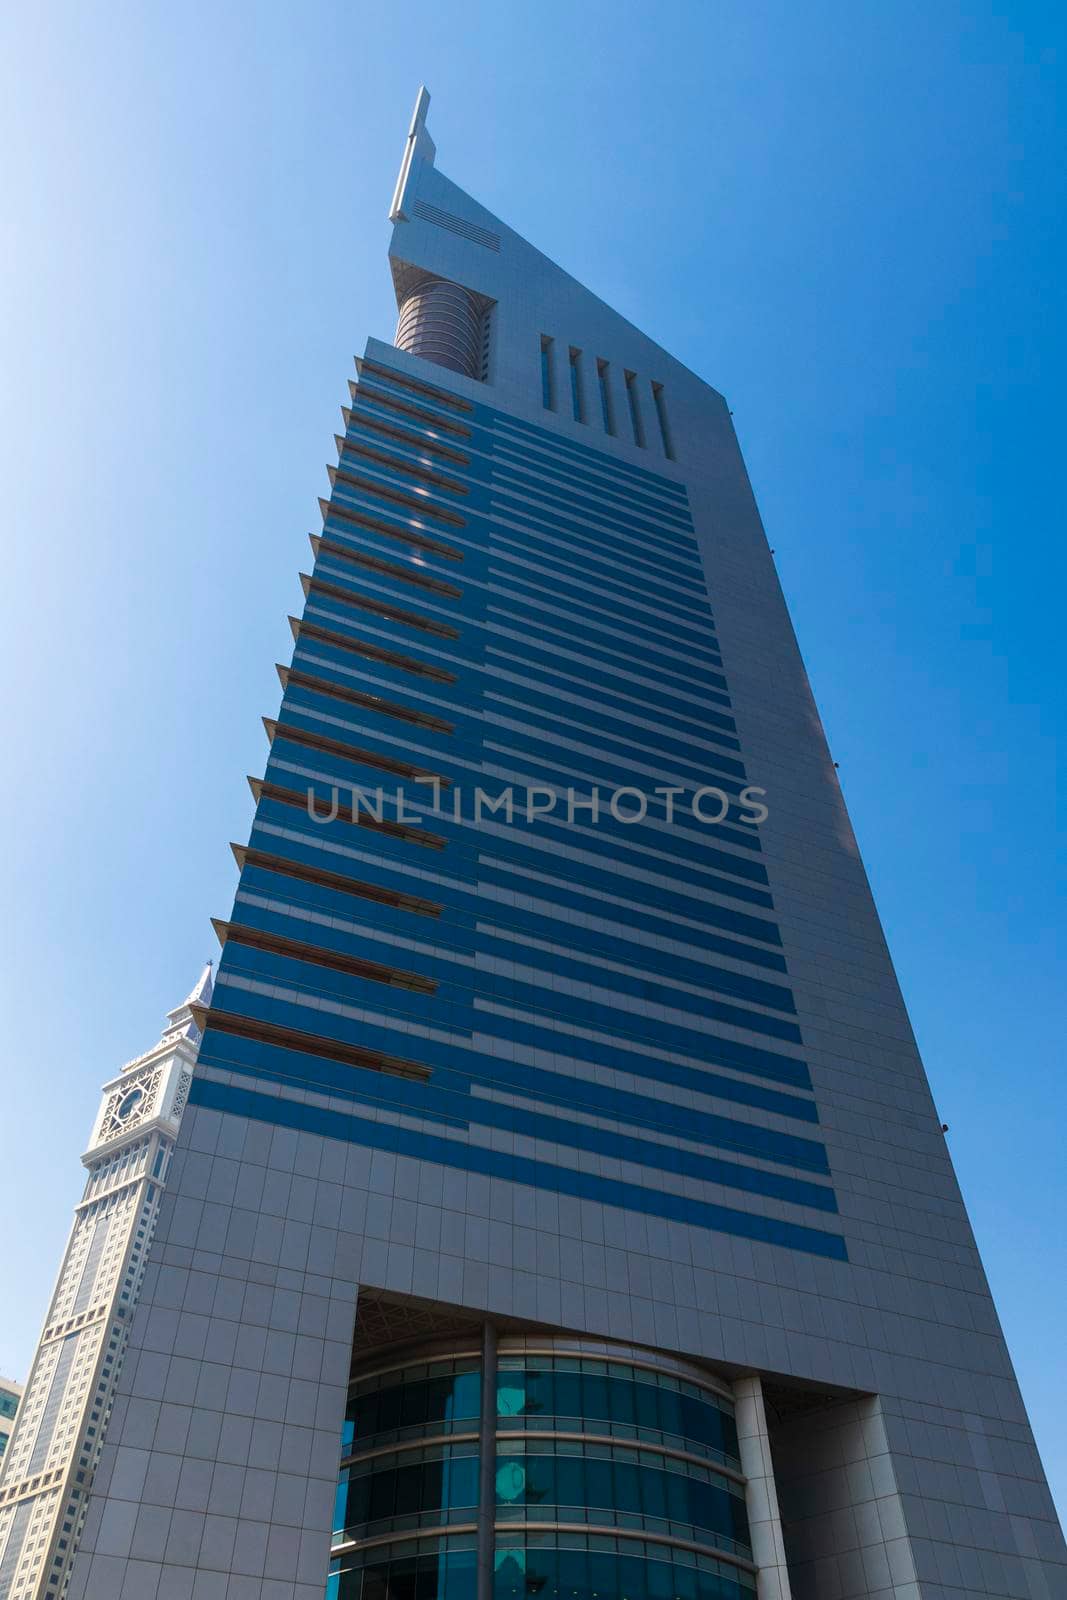 Dubai, UAE - 02.04.2021 Shot of a very well known landmark in Dabai, Emirates towers. Outdoors by pazemin